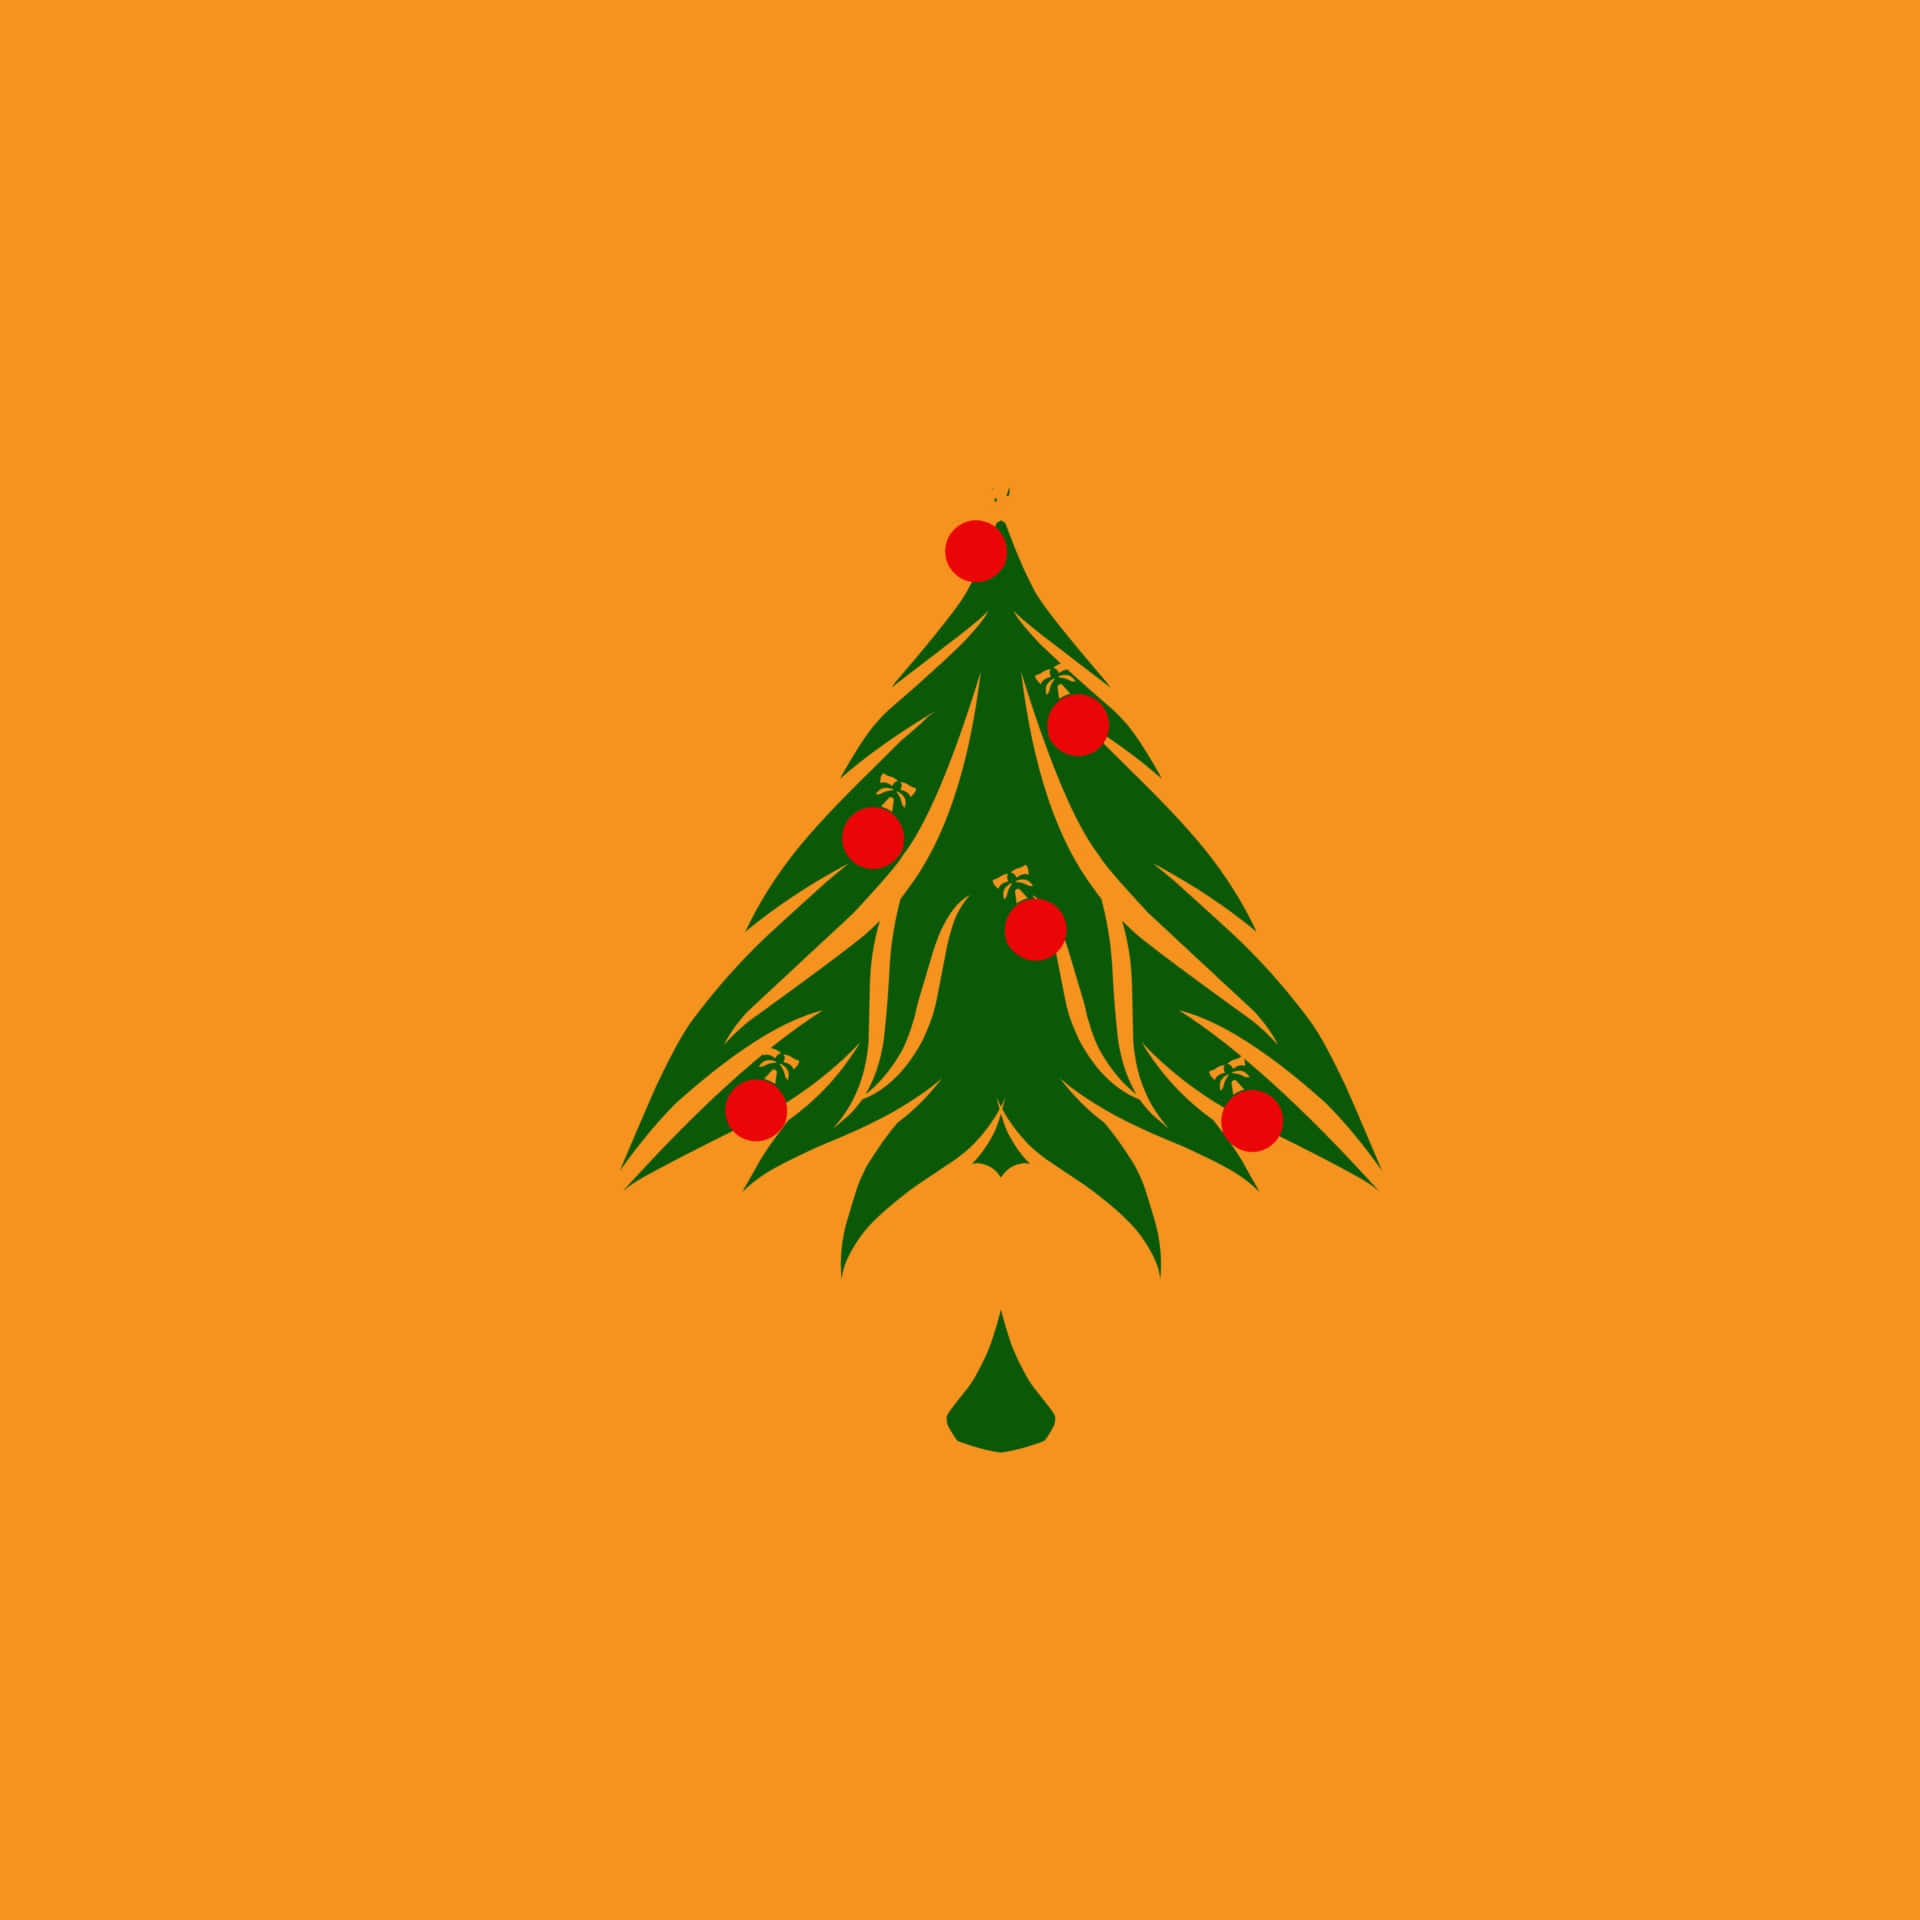 Have a Minimalist Christmas with a Festive Desktop Background Wallpaper